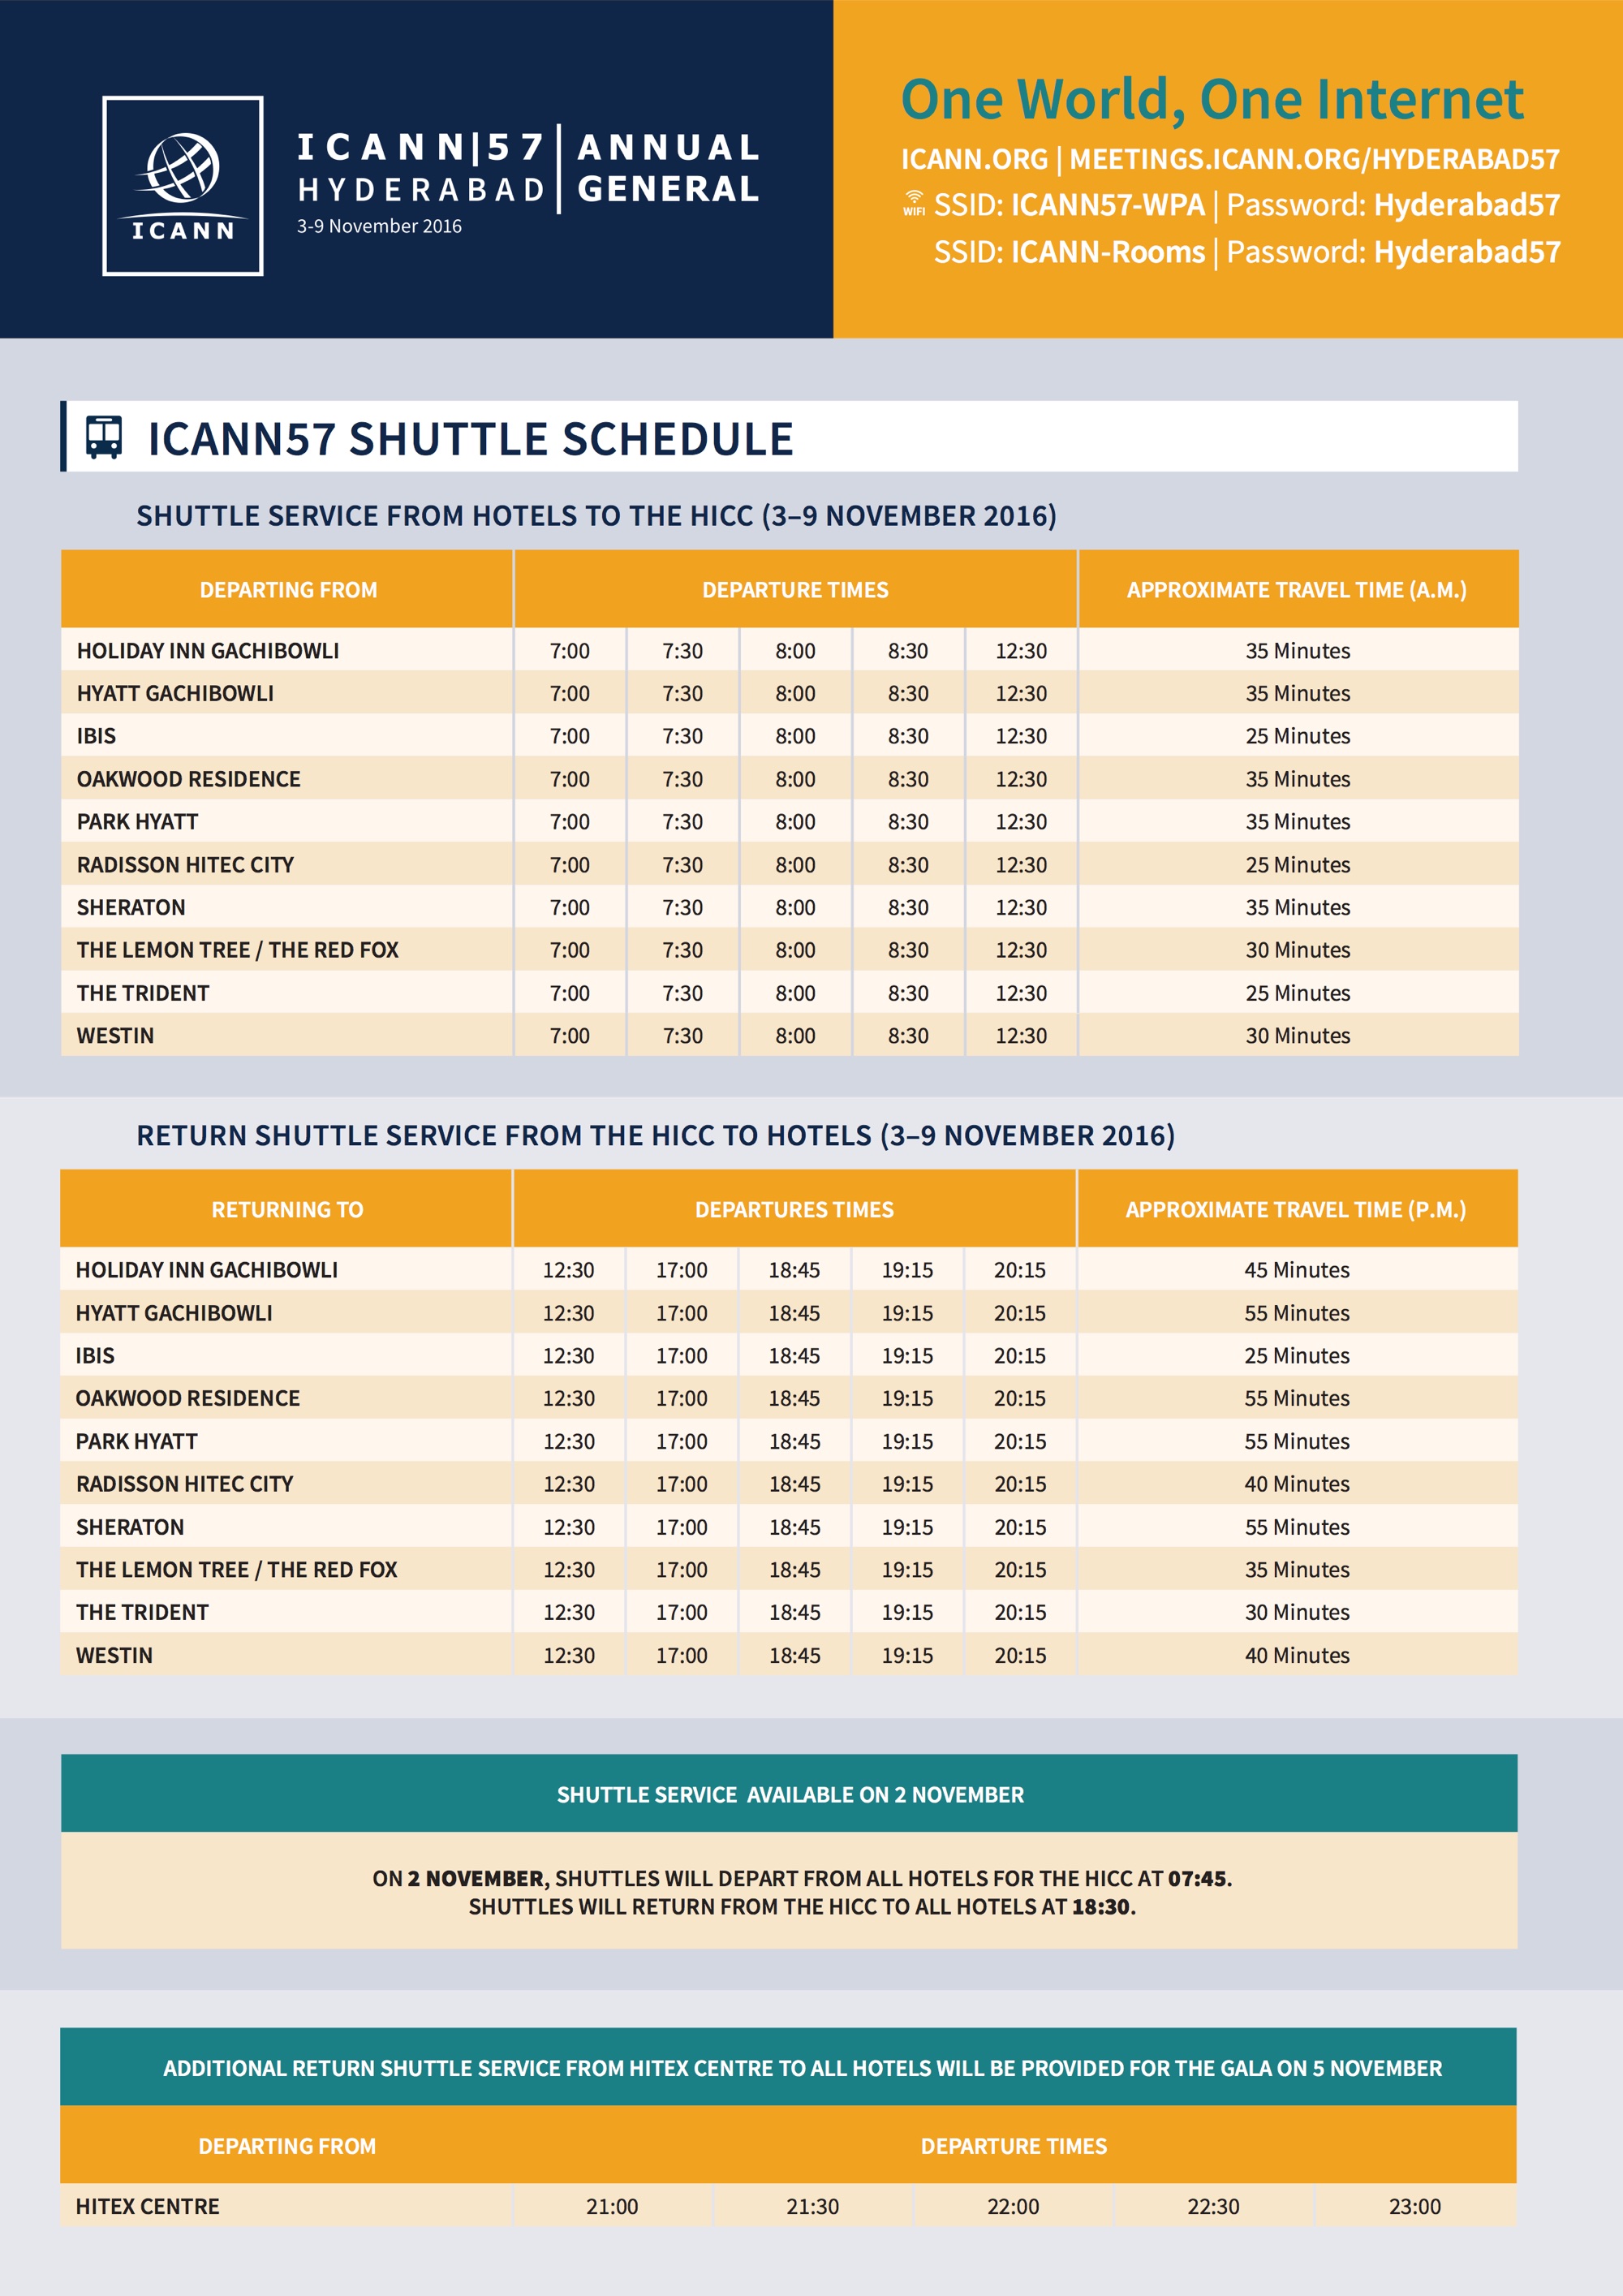 icann 57 schedule now live on web and in mobile app